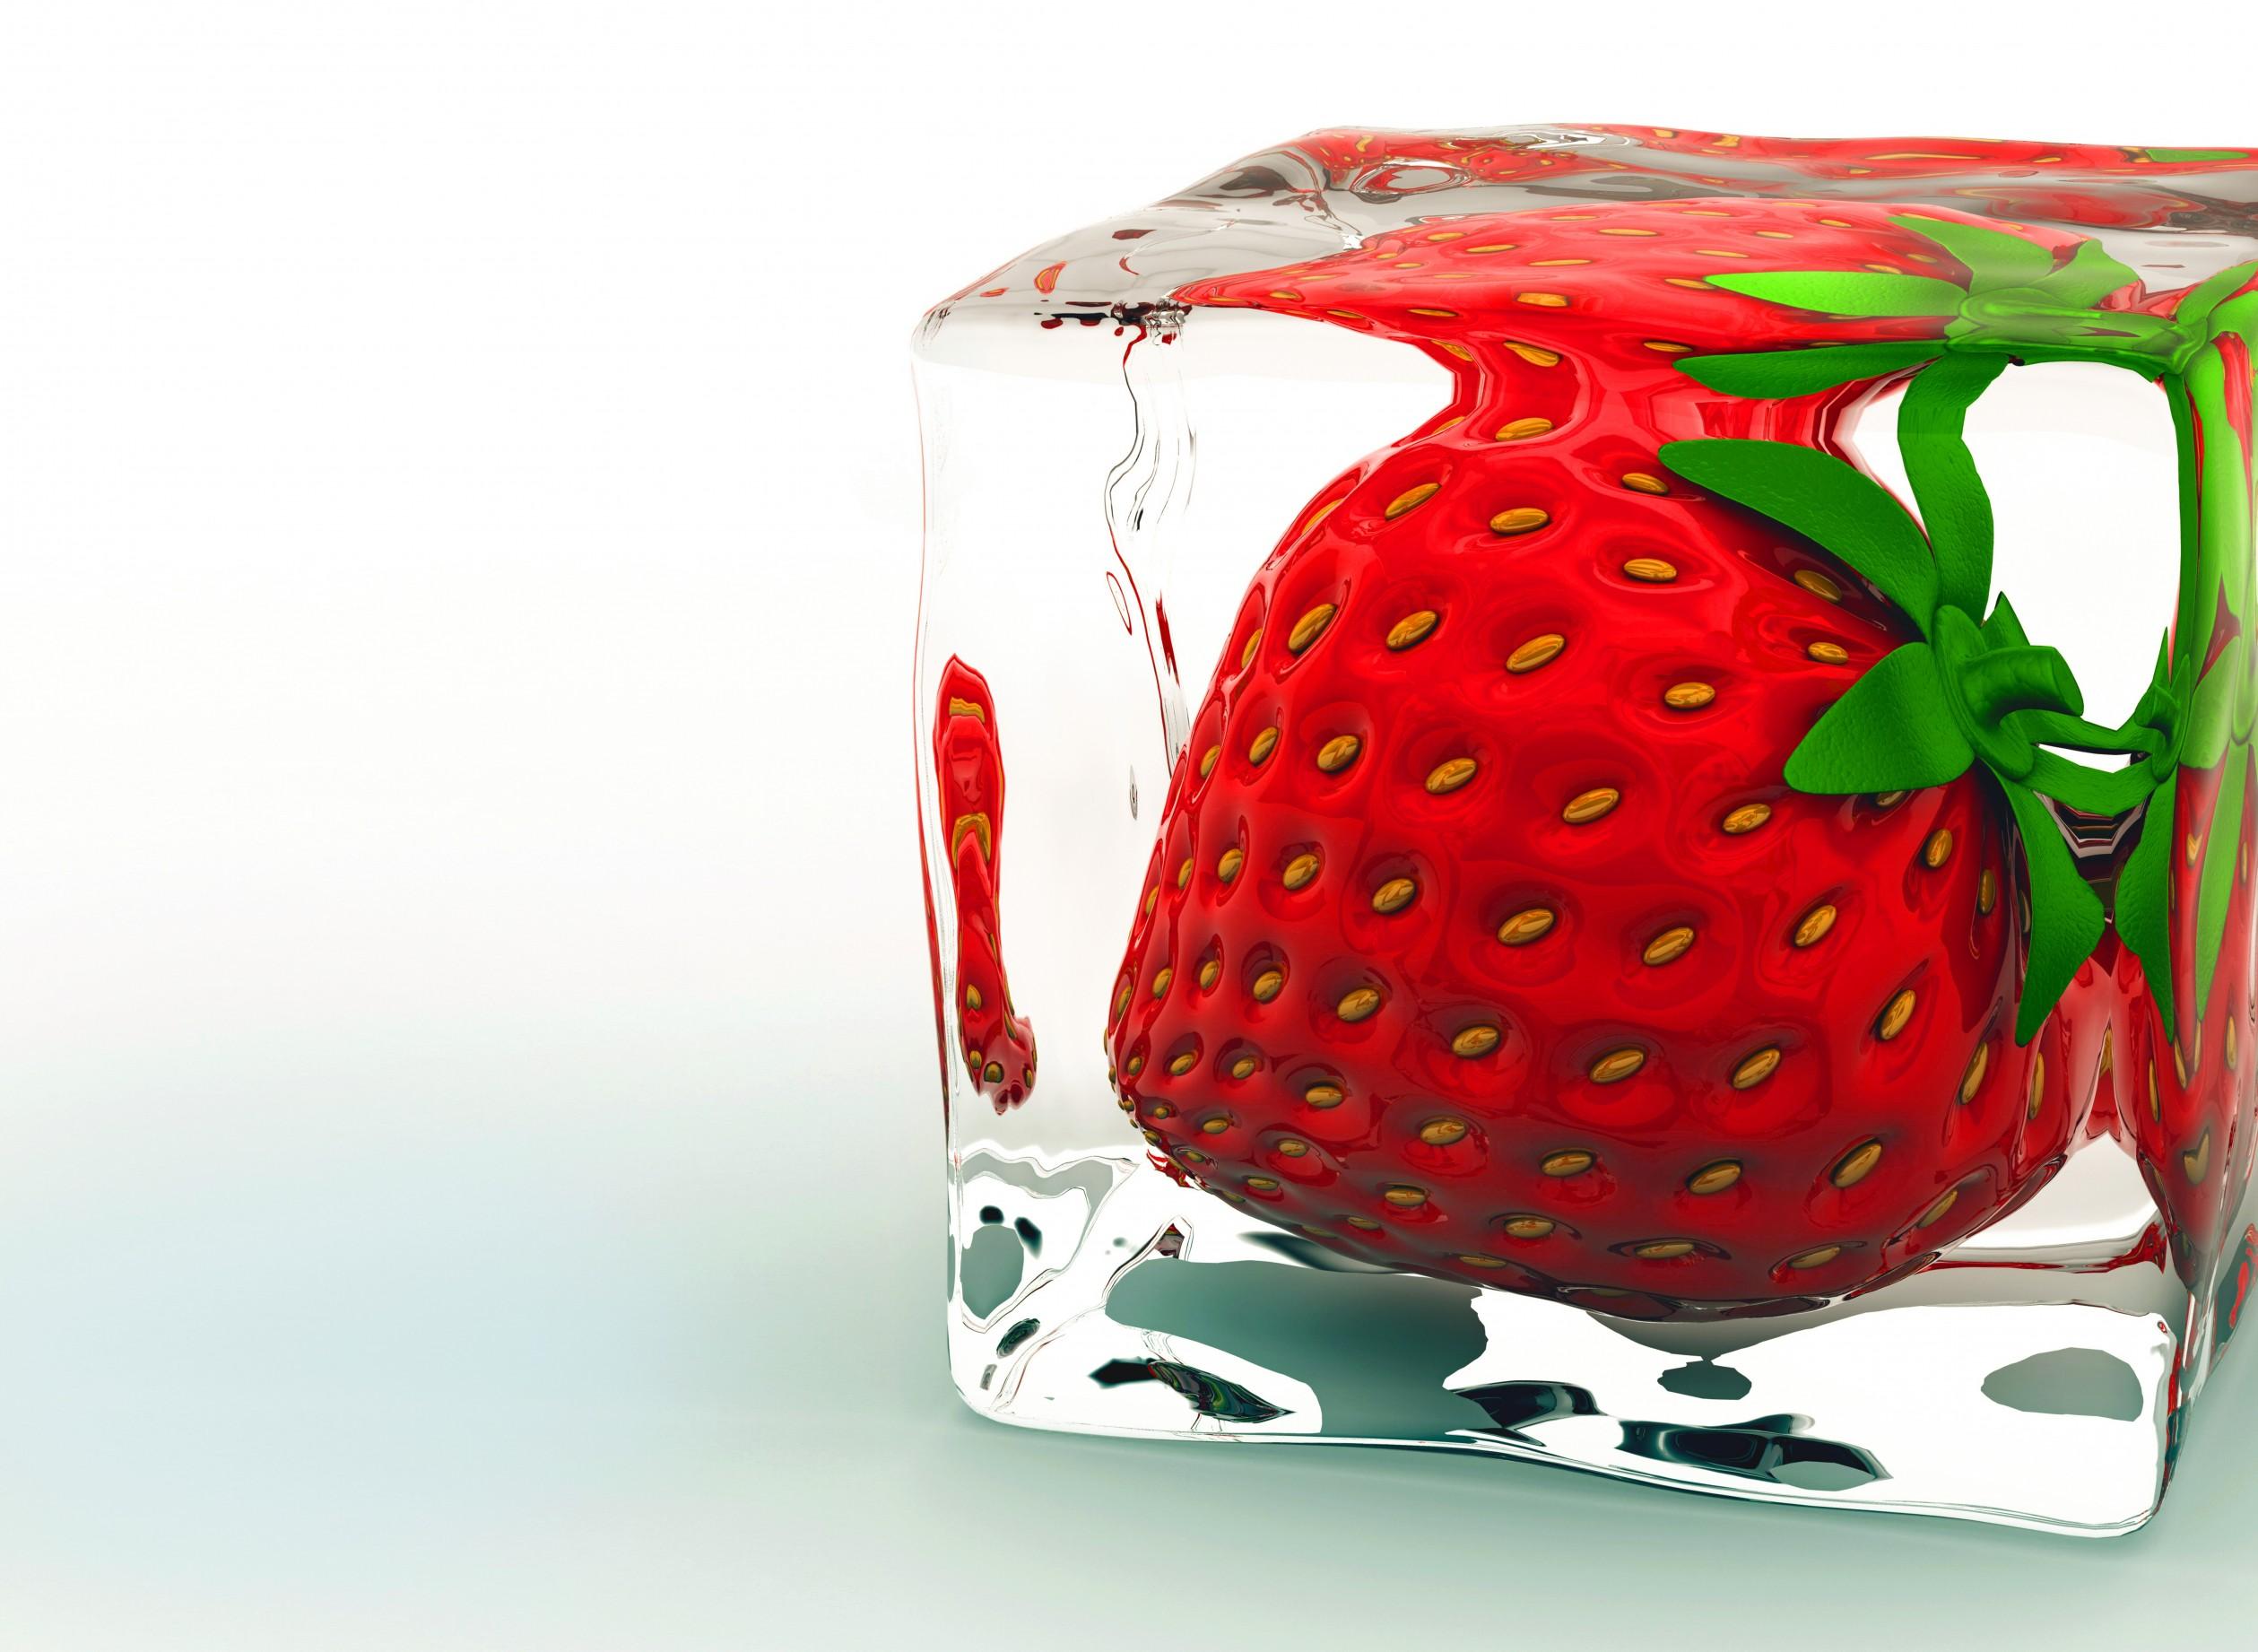 Download 2518x1842 Strawberry, Ice Cube, Fruit Wallpaper